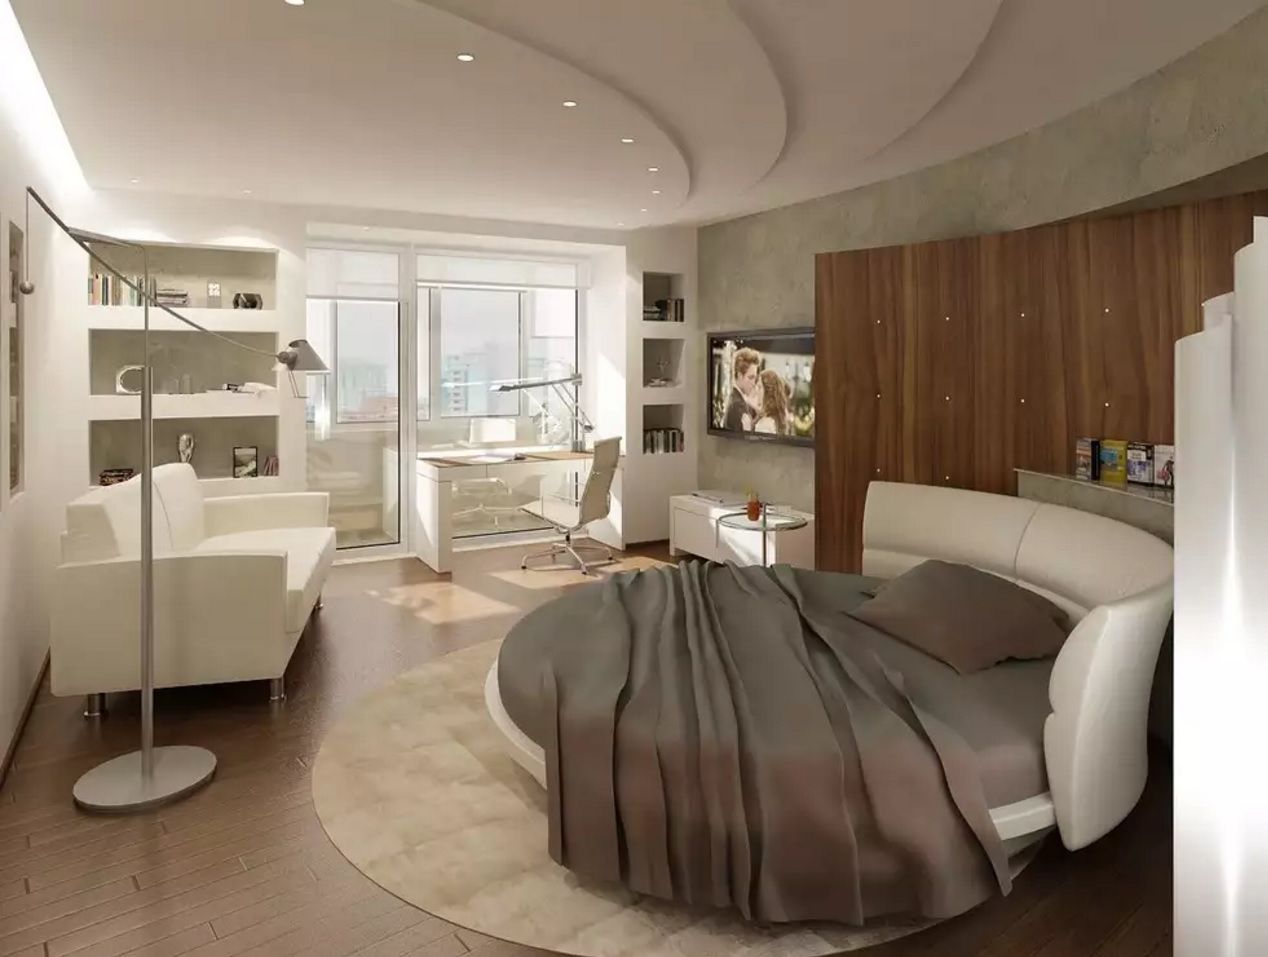 Circle Bed of Unique Bedroom Interior Design. Rounded lines of the ceiling harmonize with the overall atmosphere